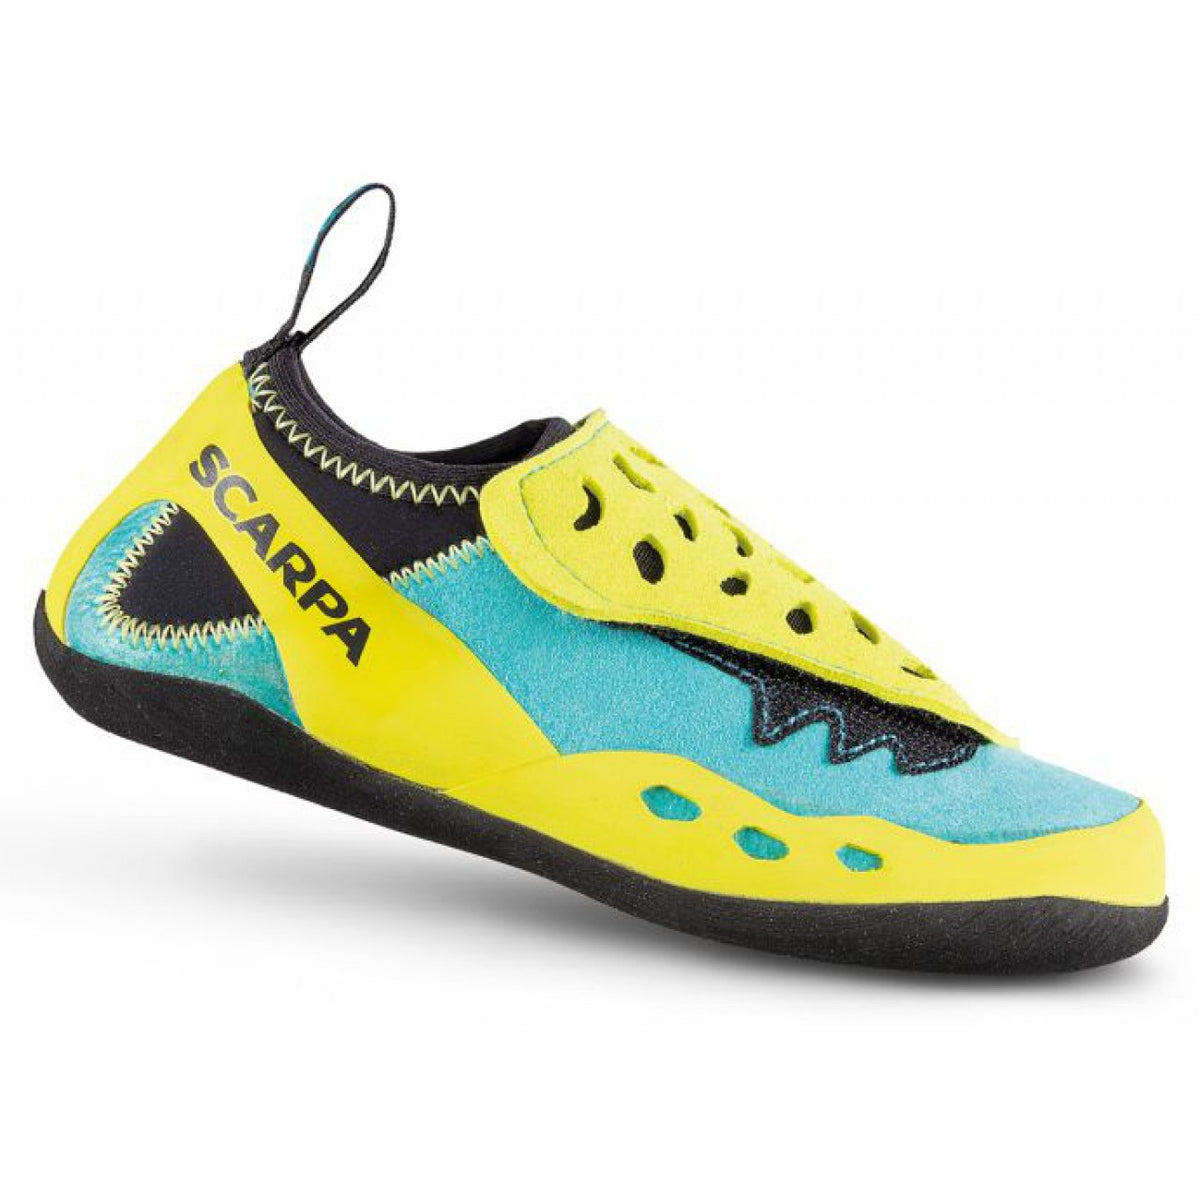 Scarpa Piki Kids climbing shoe, outer side view in yellow, green and black colour